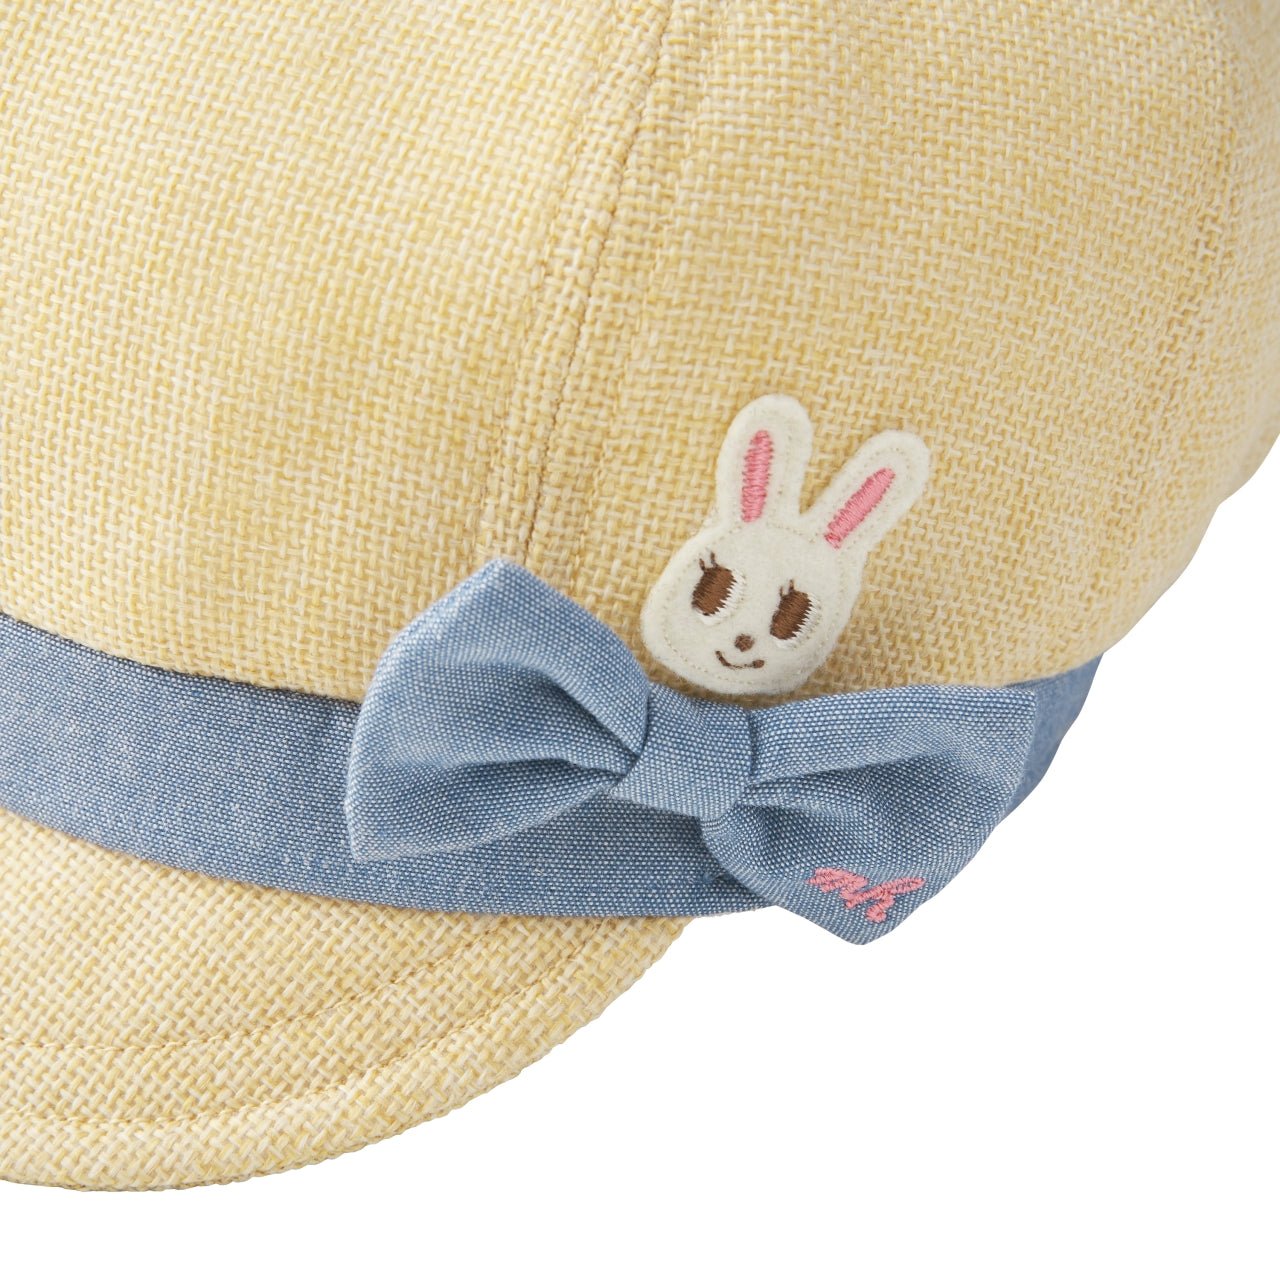 Bunny Casquette Beret (UV Protection) - MIKI HOUSE USA